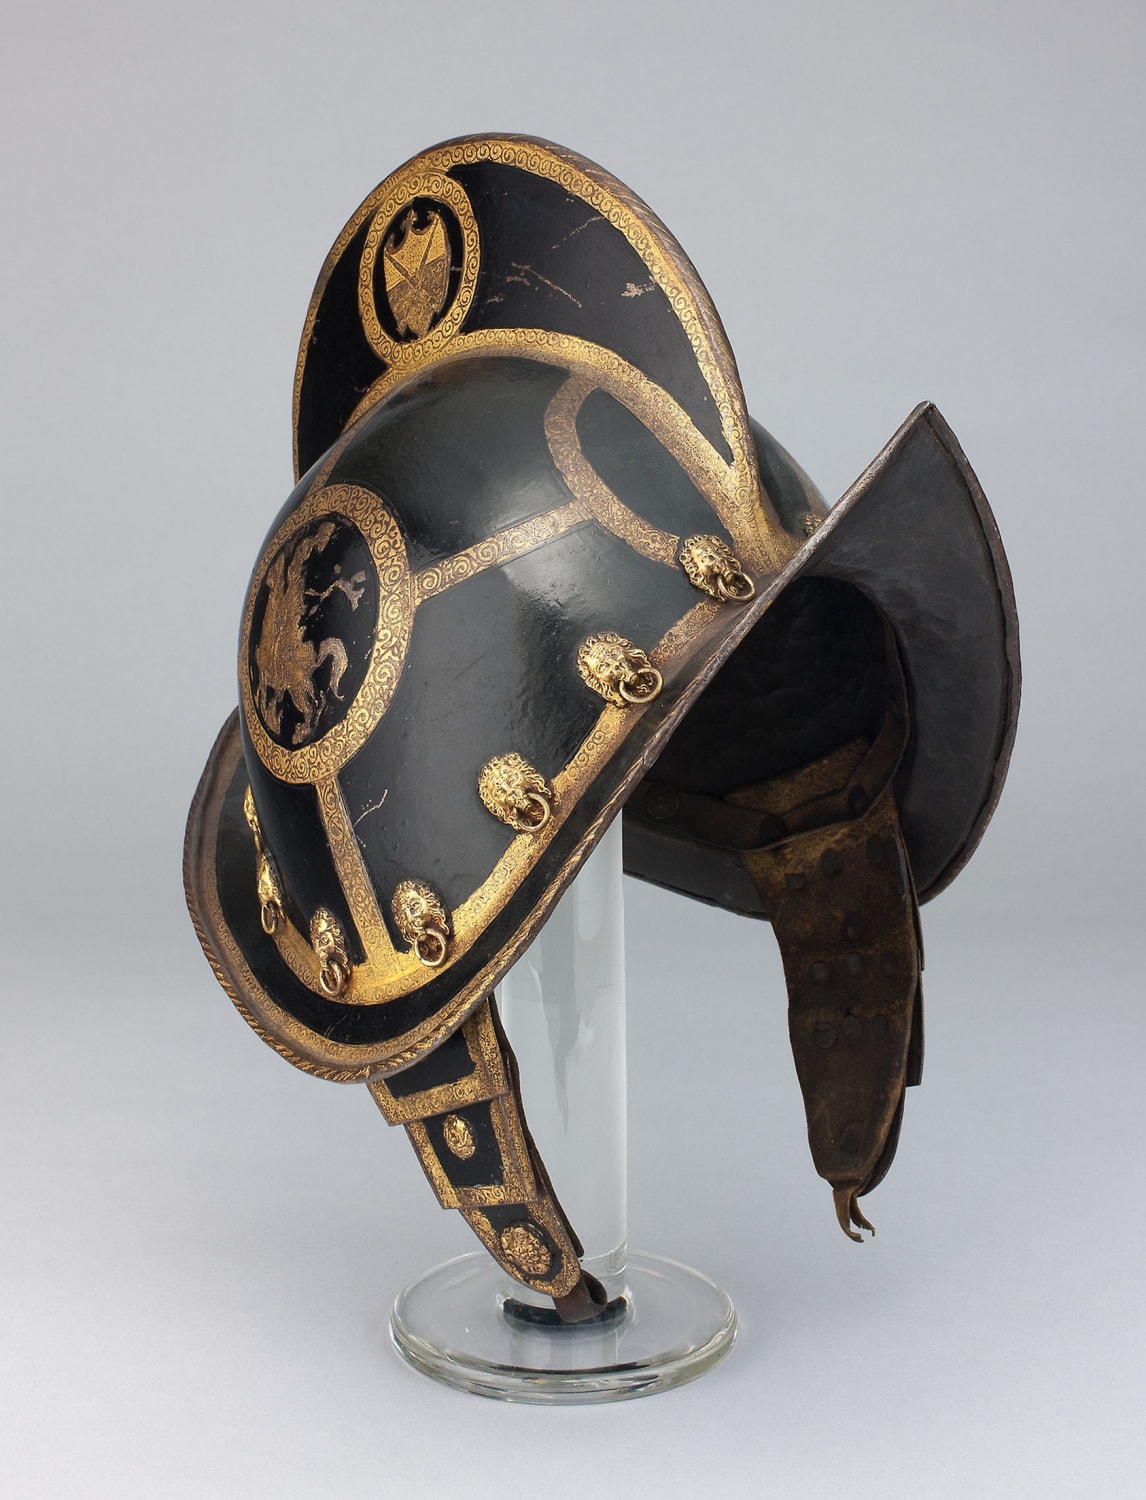 Morion for the Bodyguard of the Elector of Saxony. Made by Hans Michel 1570-1590 in Nuremberg of steel, gilding, brass and leather.